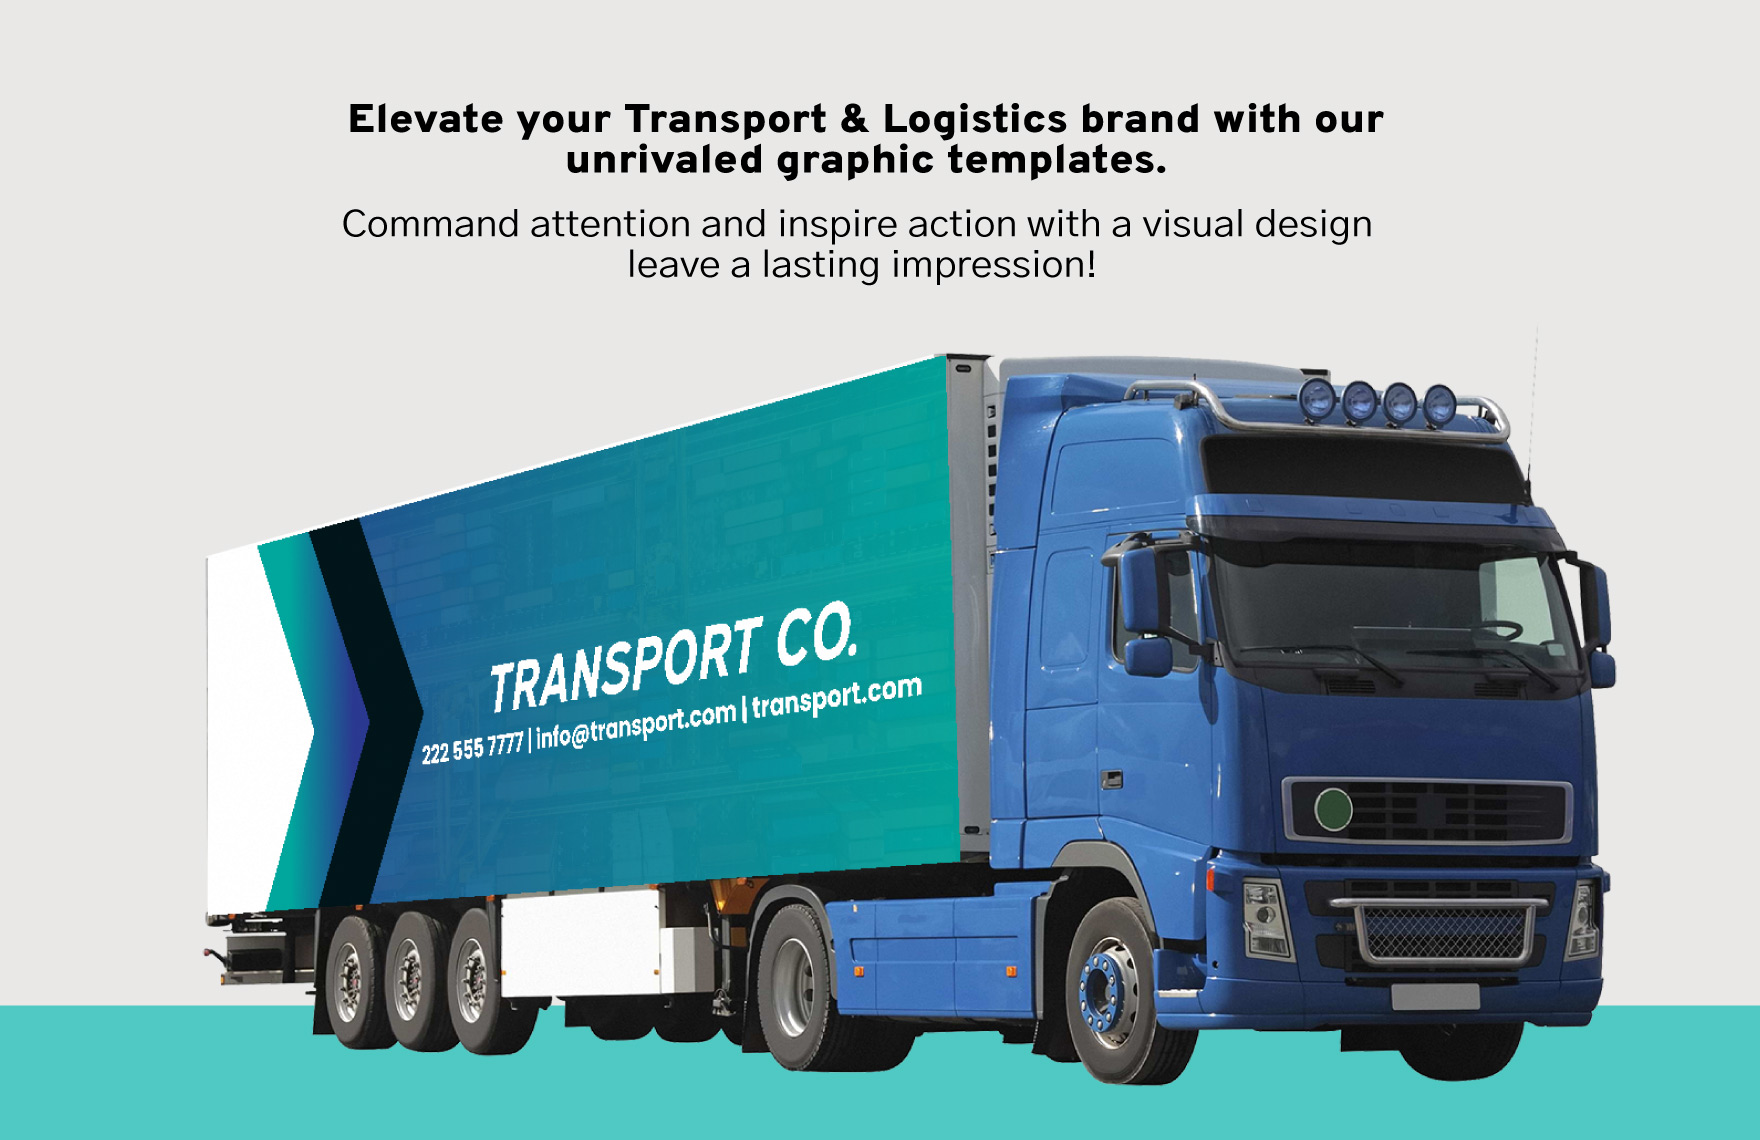 Transport and Logistics Box Truck Wrap with Service Details Template